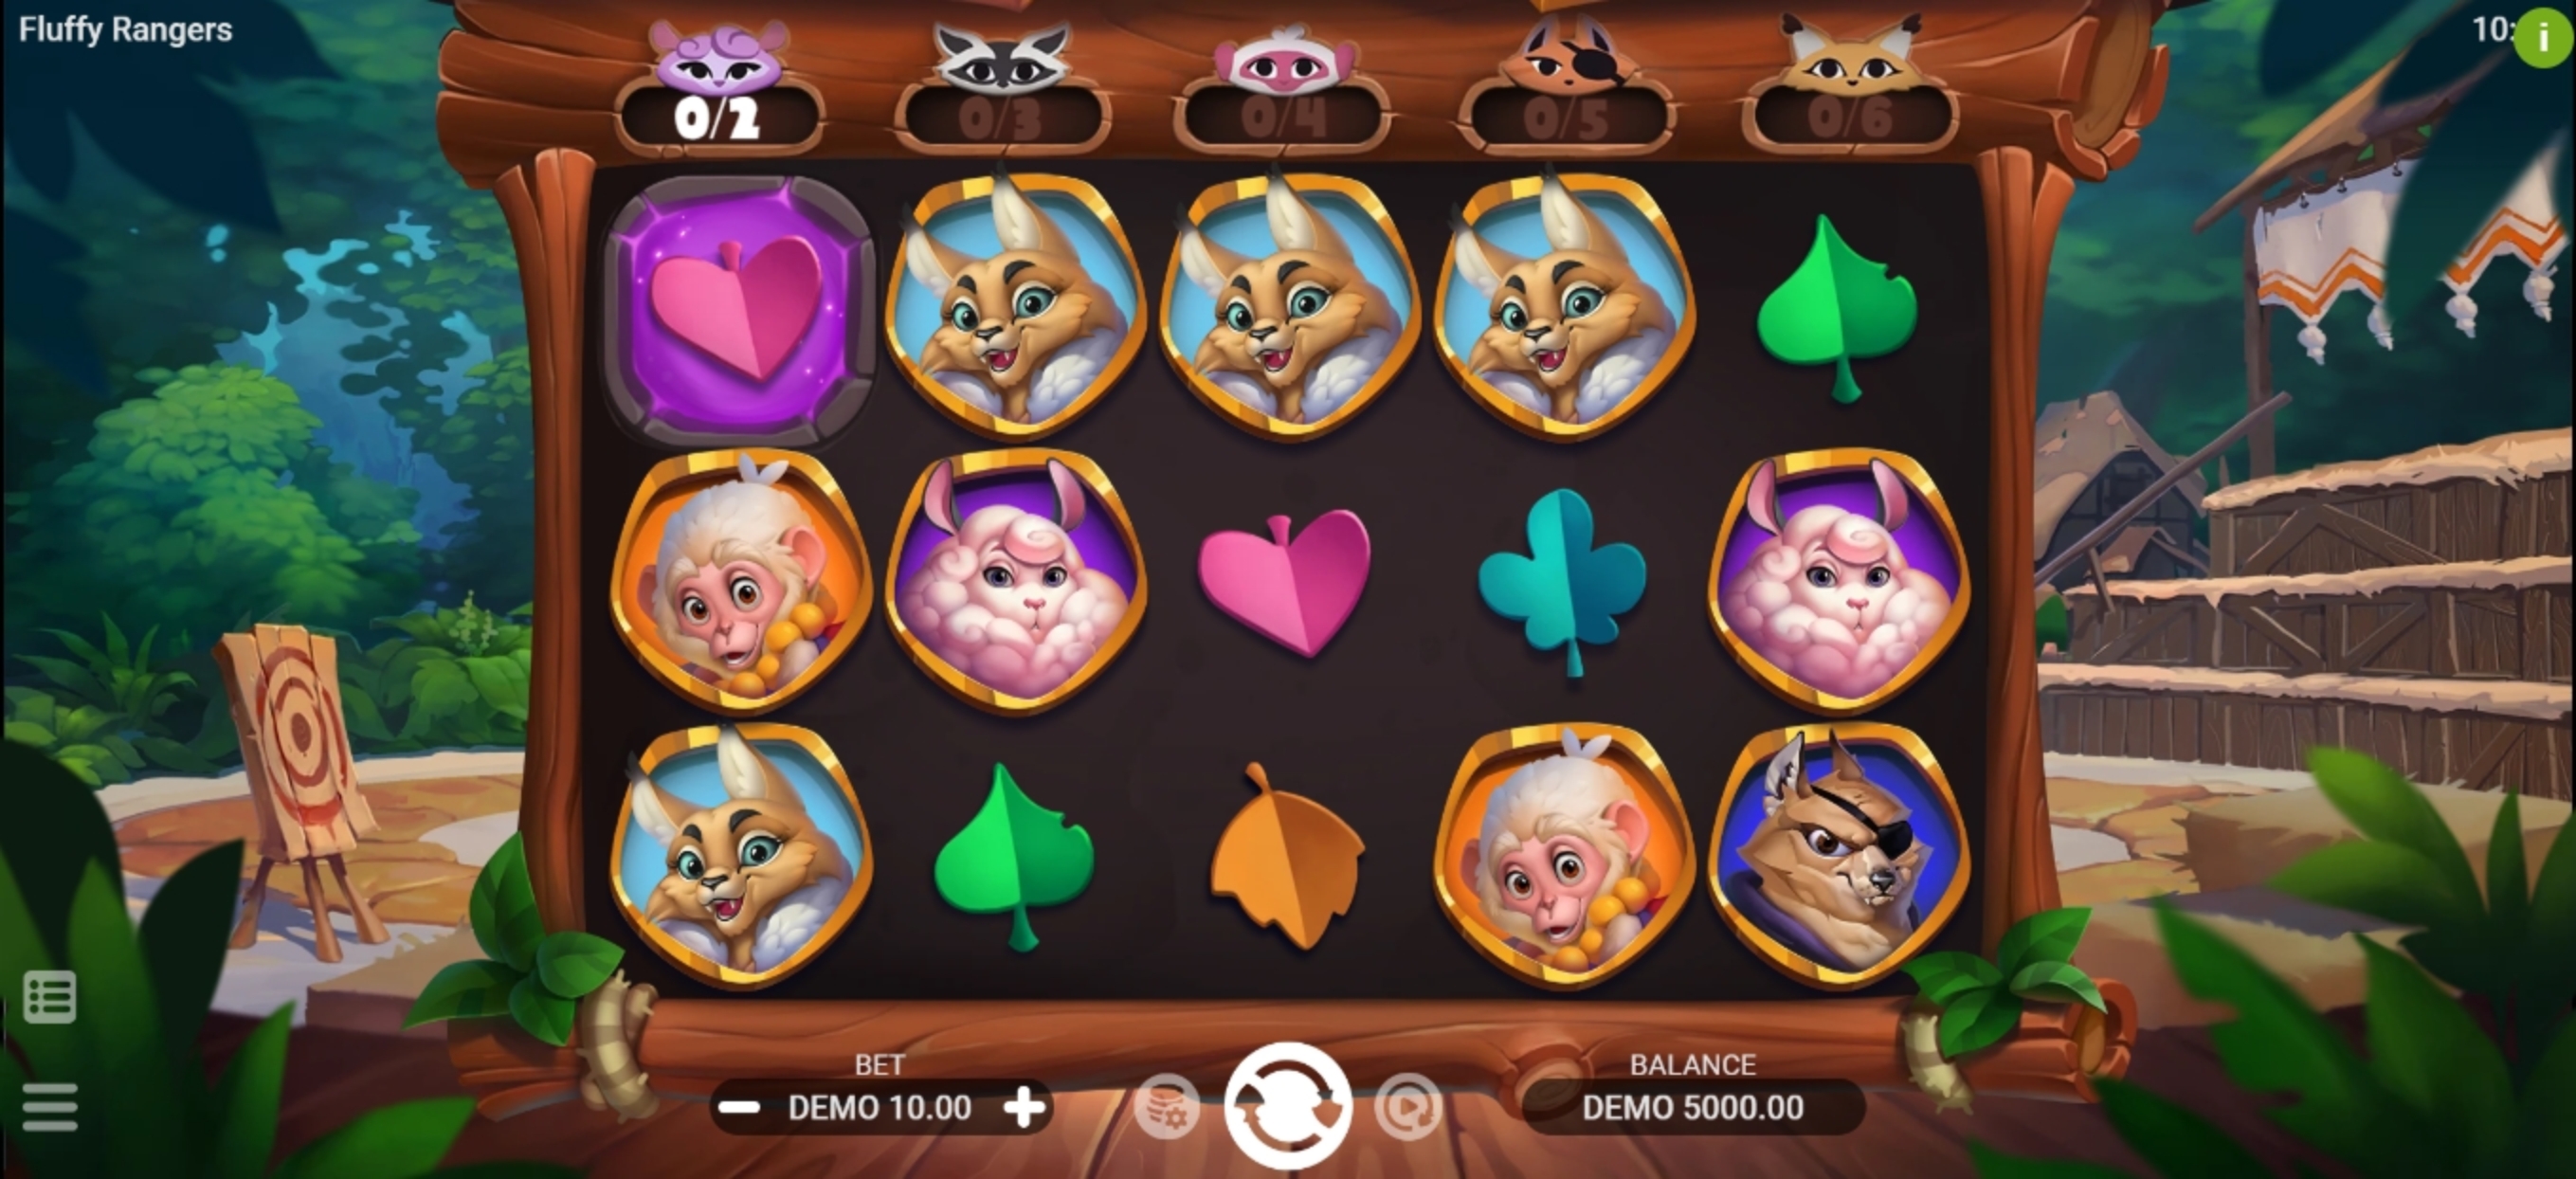 Reels in Fluffy Rangers Slot Game by Evoplay Entertainment